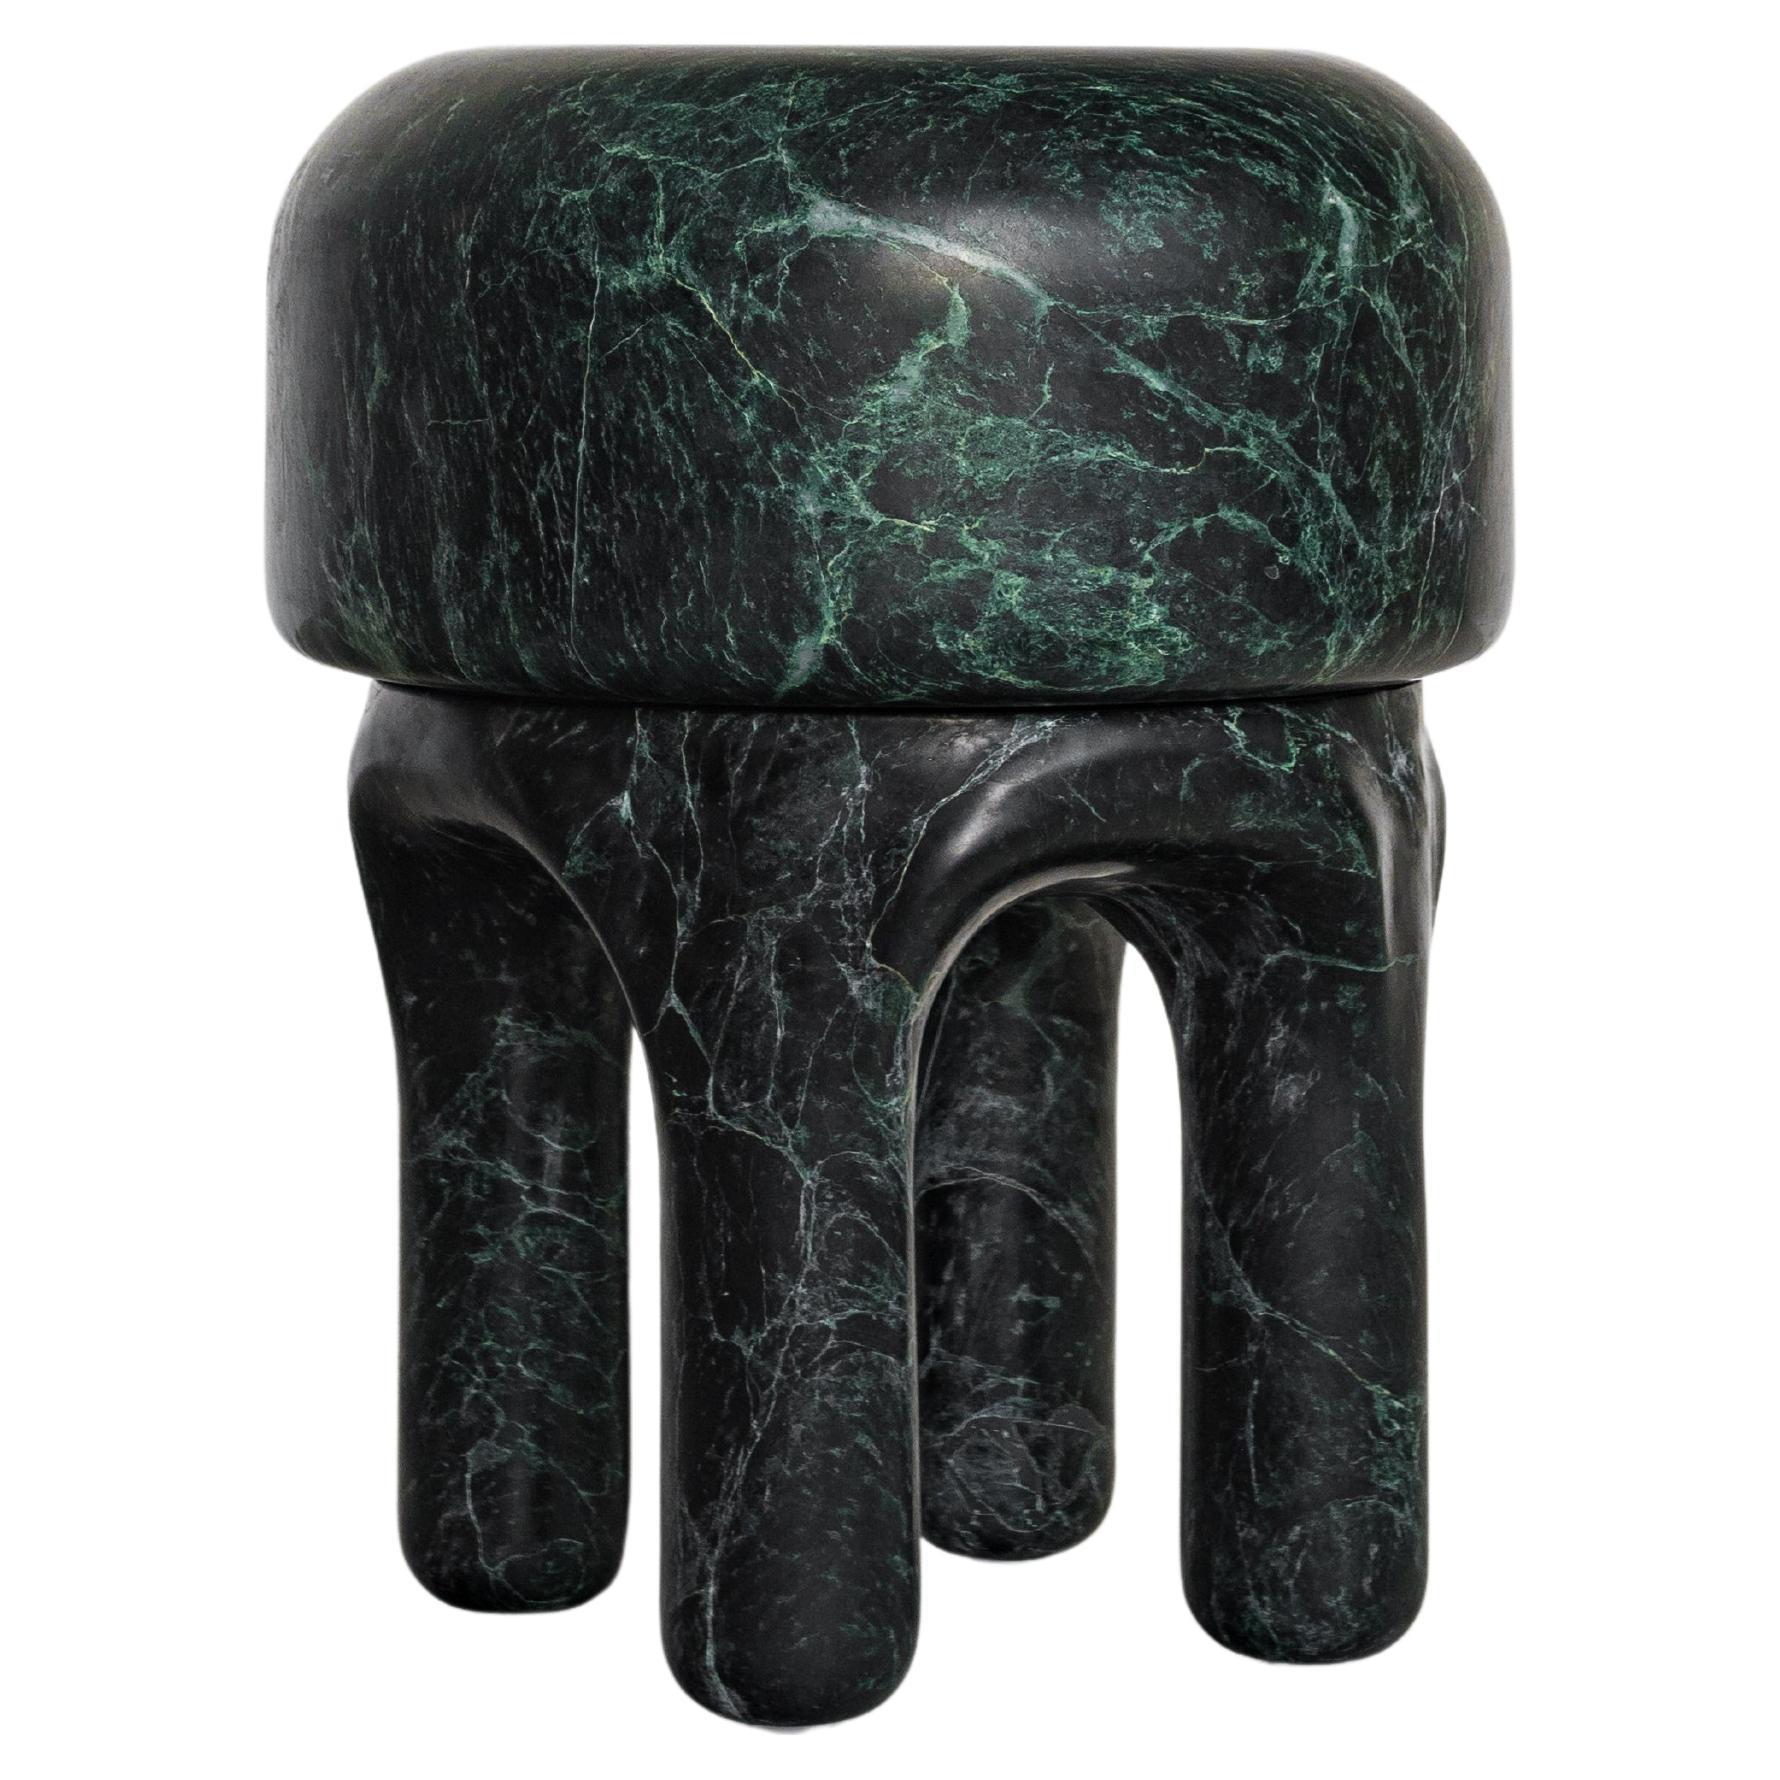 Marble Stool - Sculpture, Contemporary Italian Collectible Design For Sale